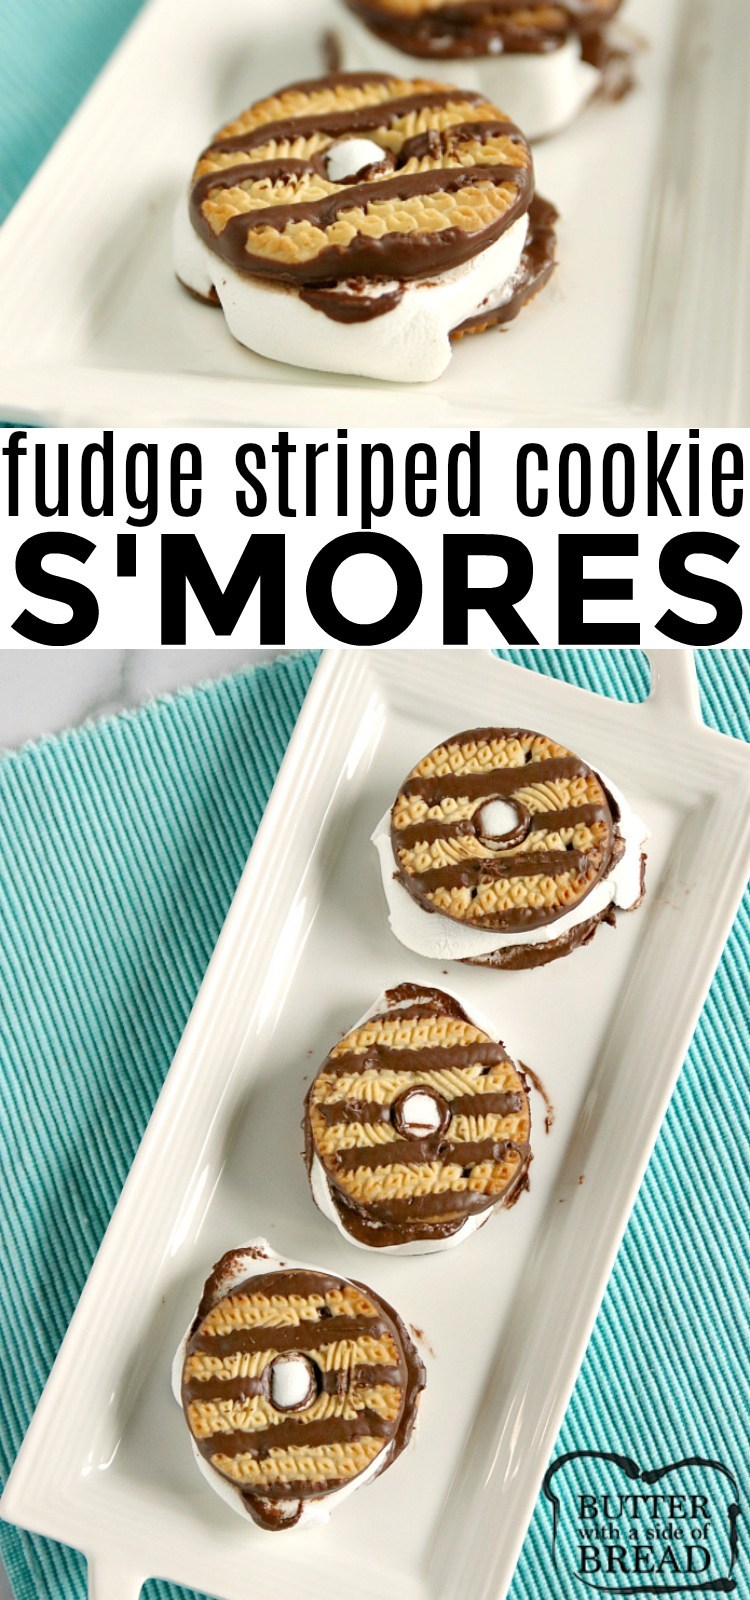 Fudge Striped Cookie S'mores have the perfect balance of cookie, marshmallow and chocolate! Make these s'mores in the oven, microwave or around the campfire!